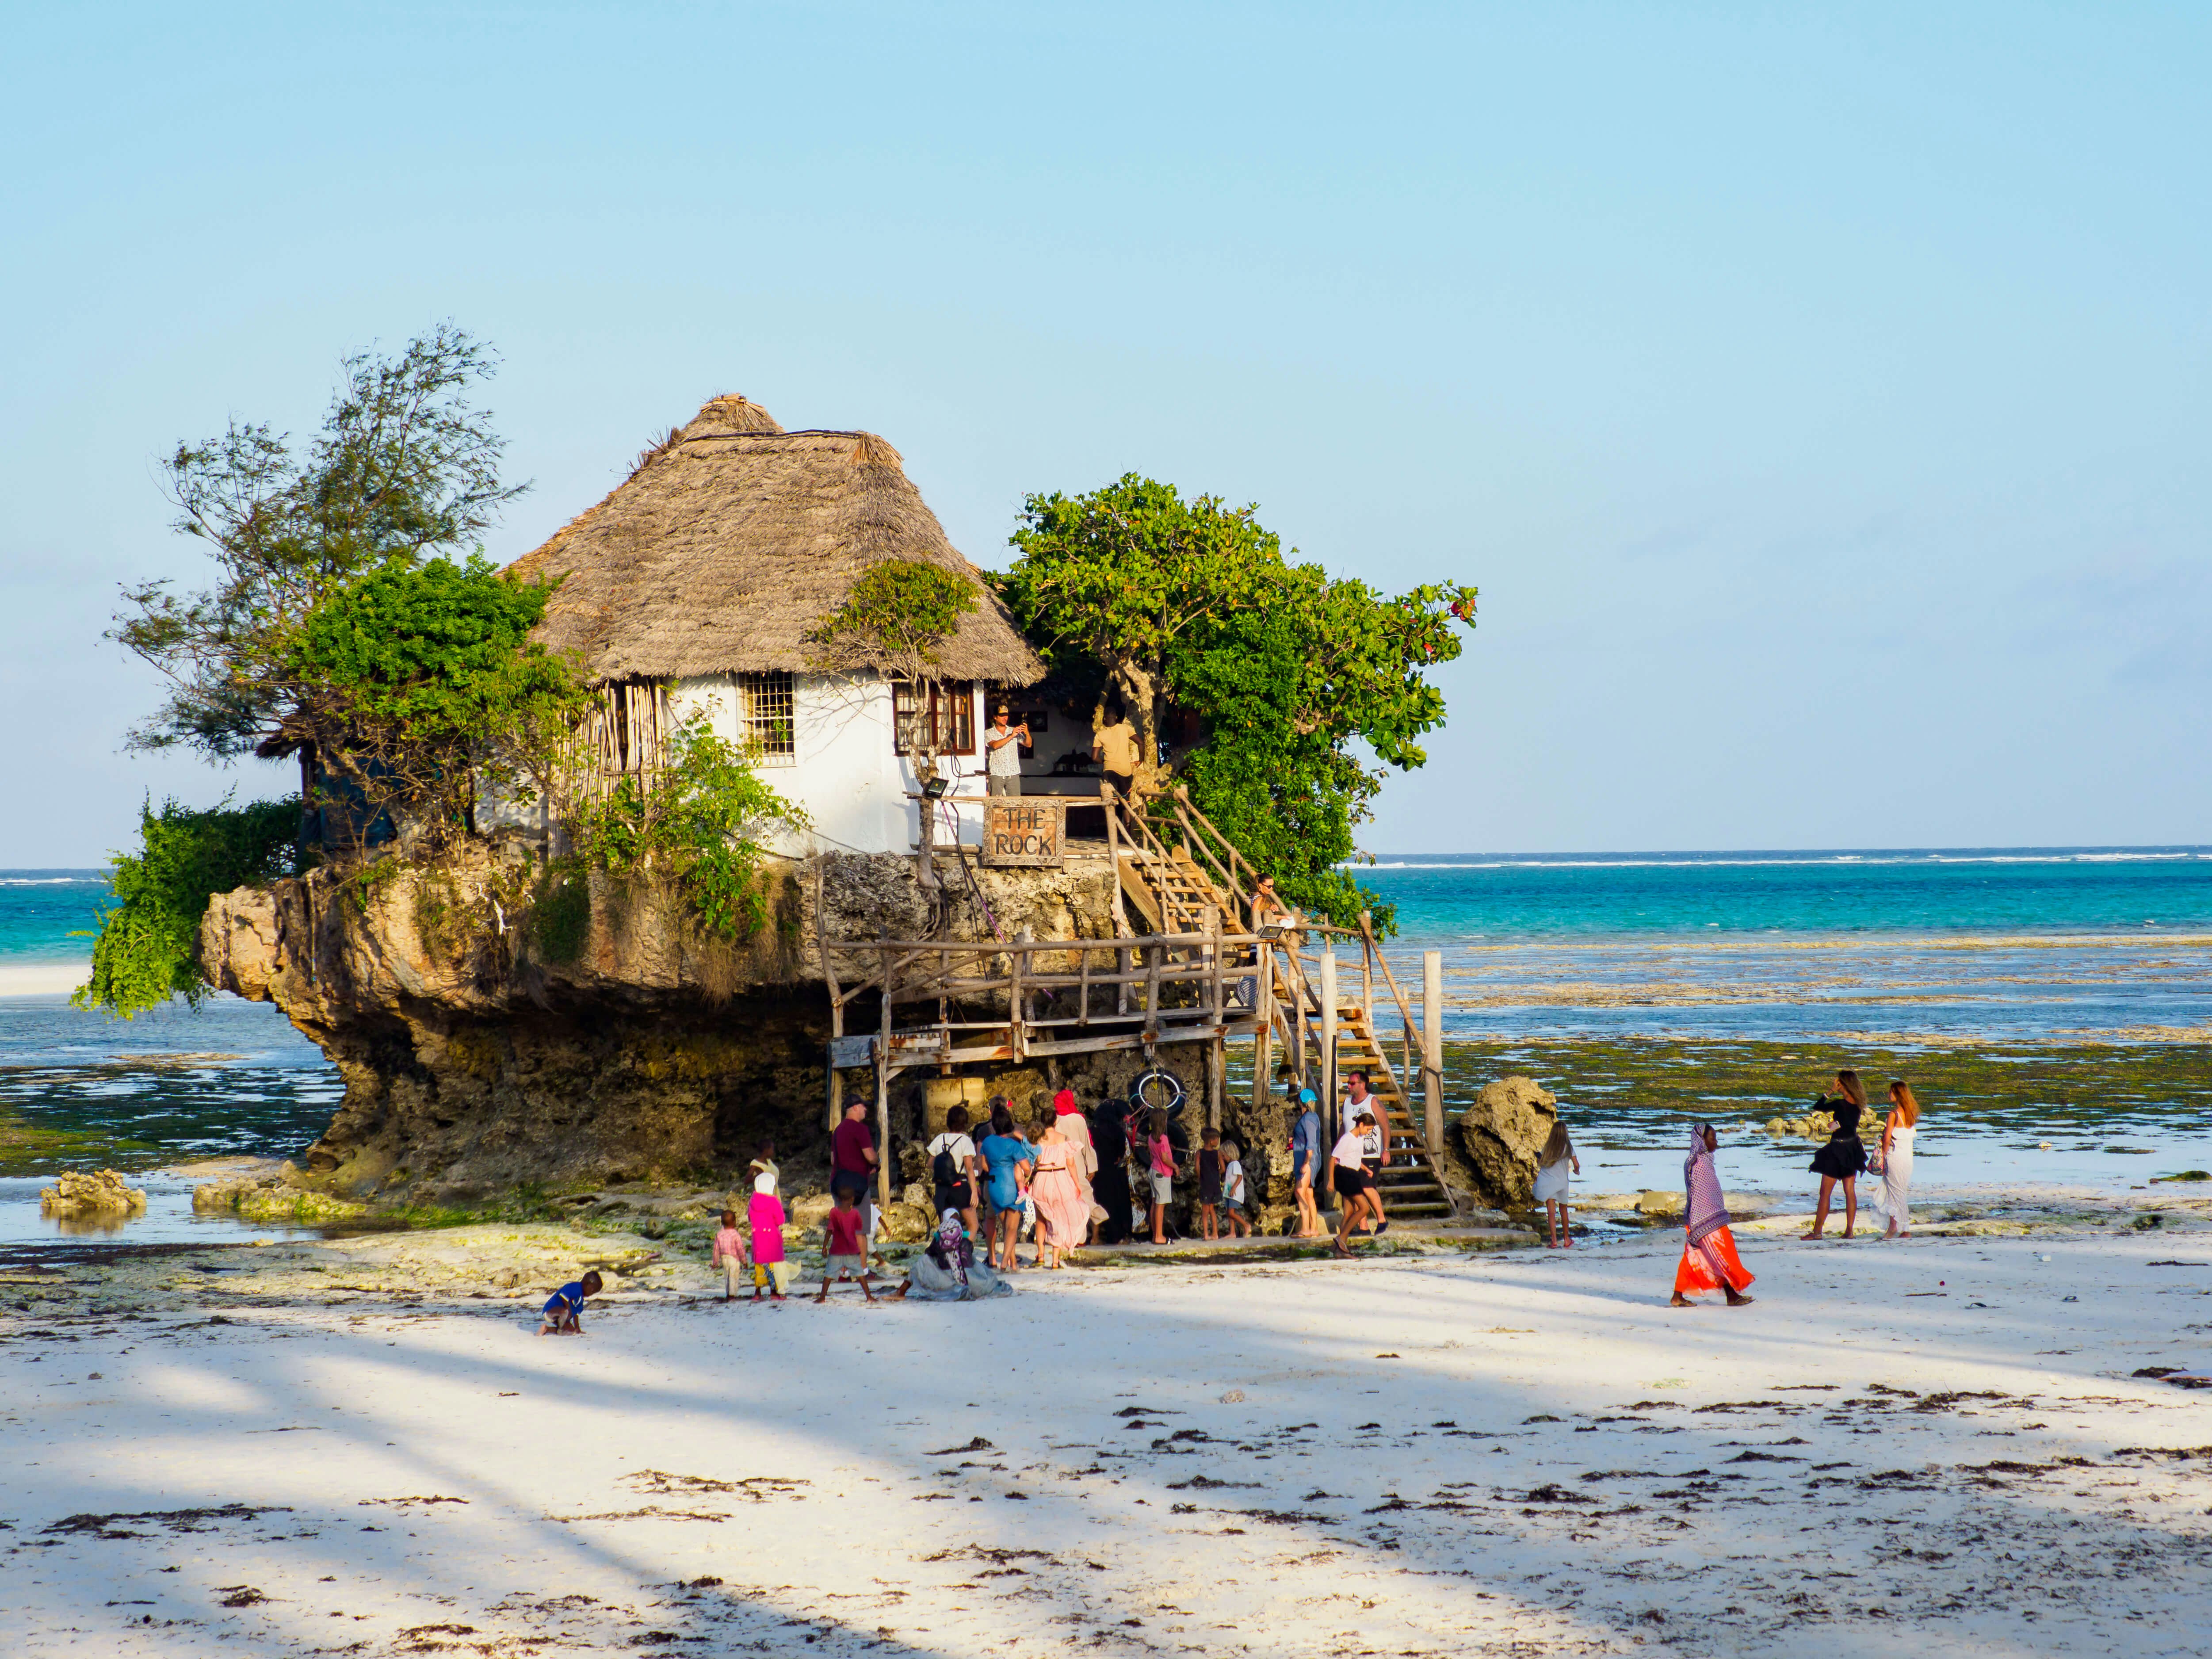 People gathered in front of the Rock, a restaurant built on the cliff in the sea by Pingwe beach in Zanzibar